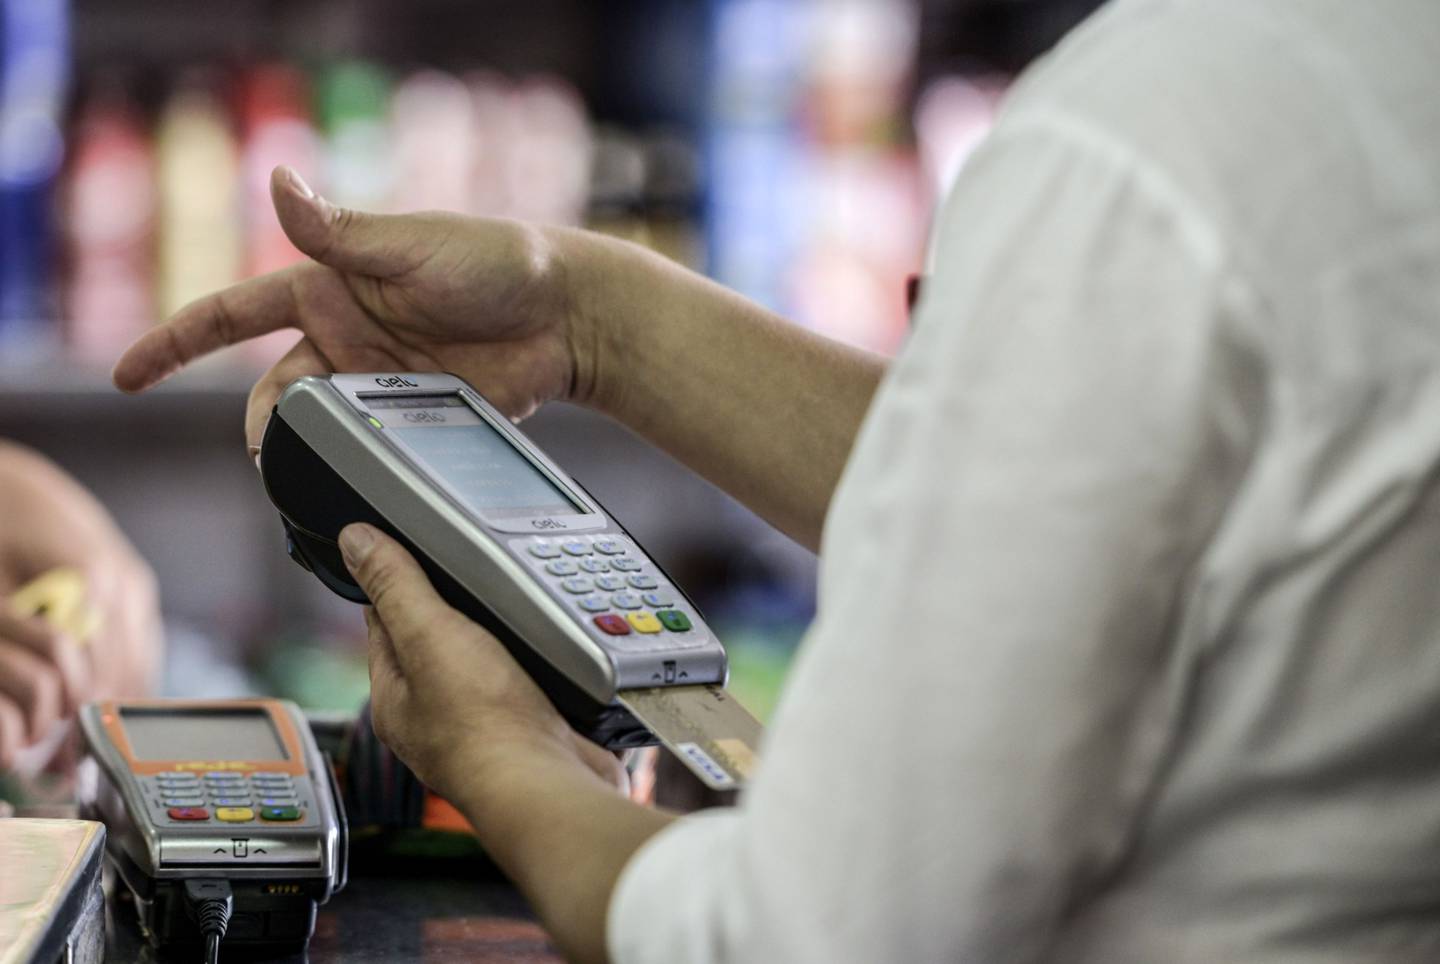 Due to a measure introduced by the Argentine government, payments with bank cards by non-residents increased by 280%